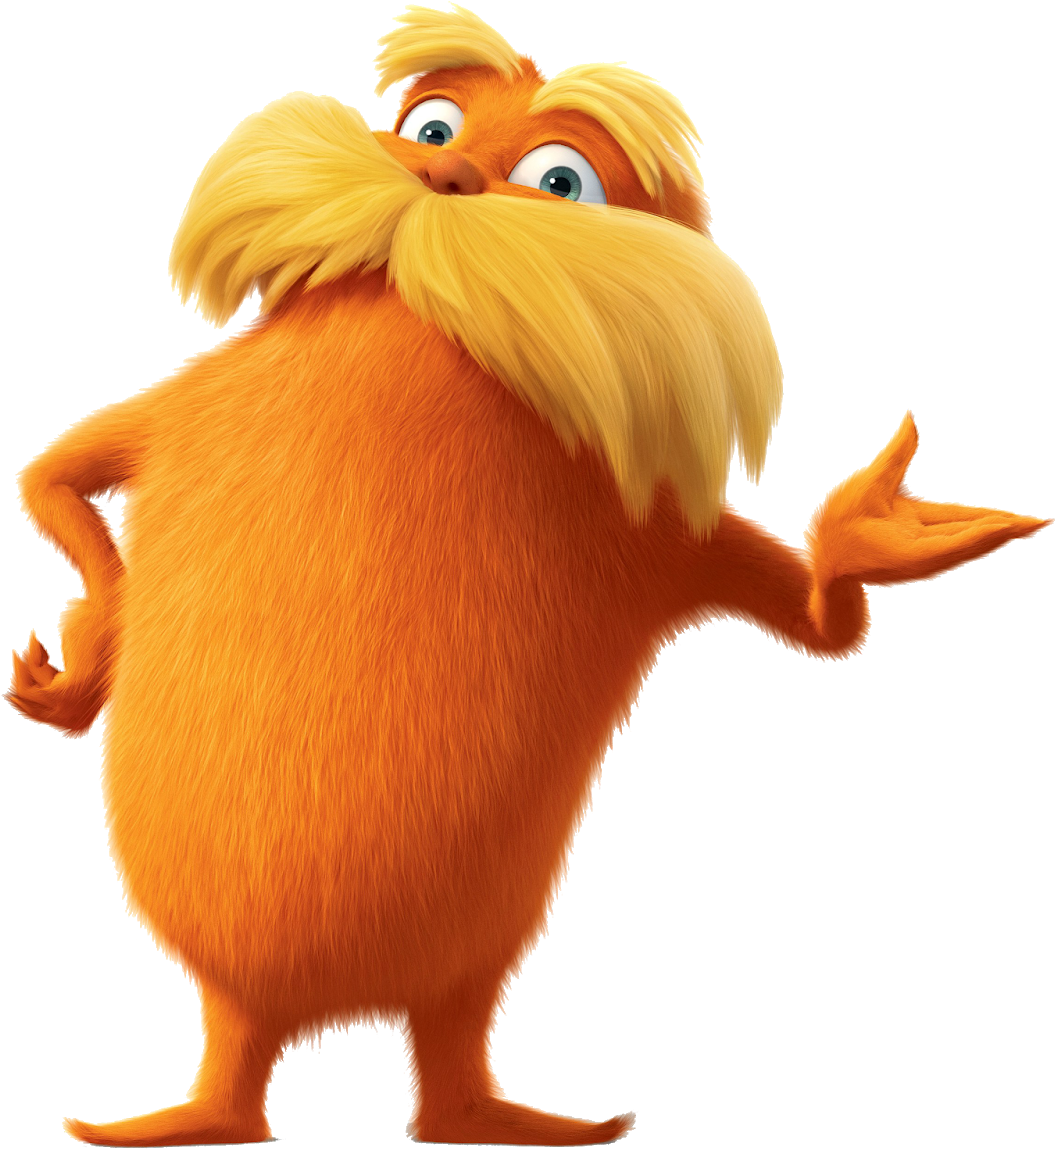 Download Descarga Gratis Imagenes De Lorax Png Transparente Unless Someone Like You Cares A Whole Awful Lot Nothing Png Image With No Background Pngkey Com